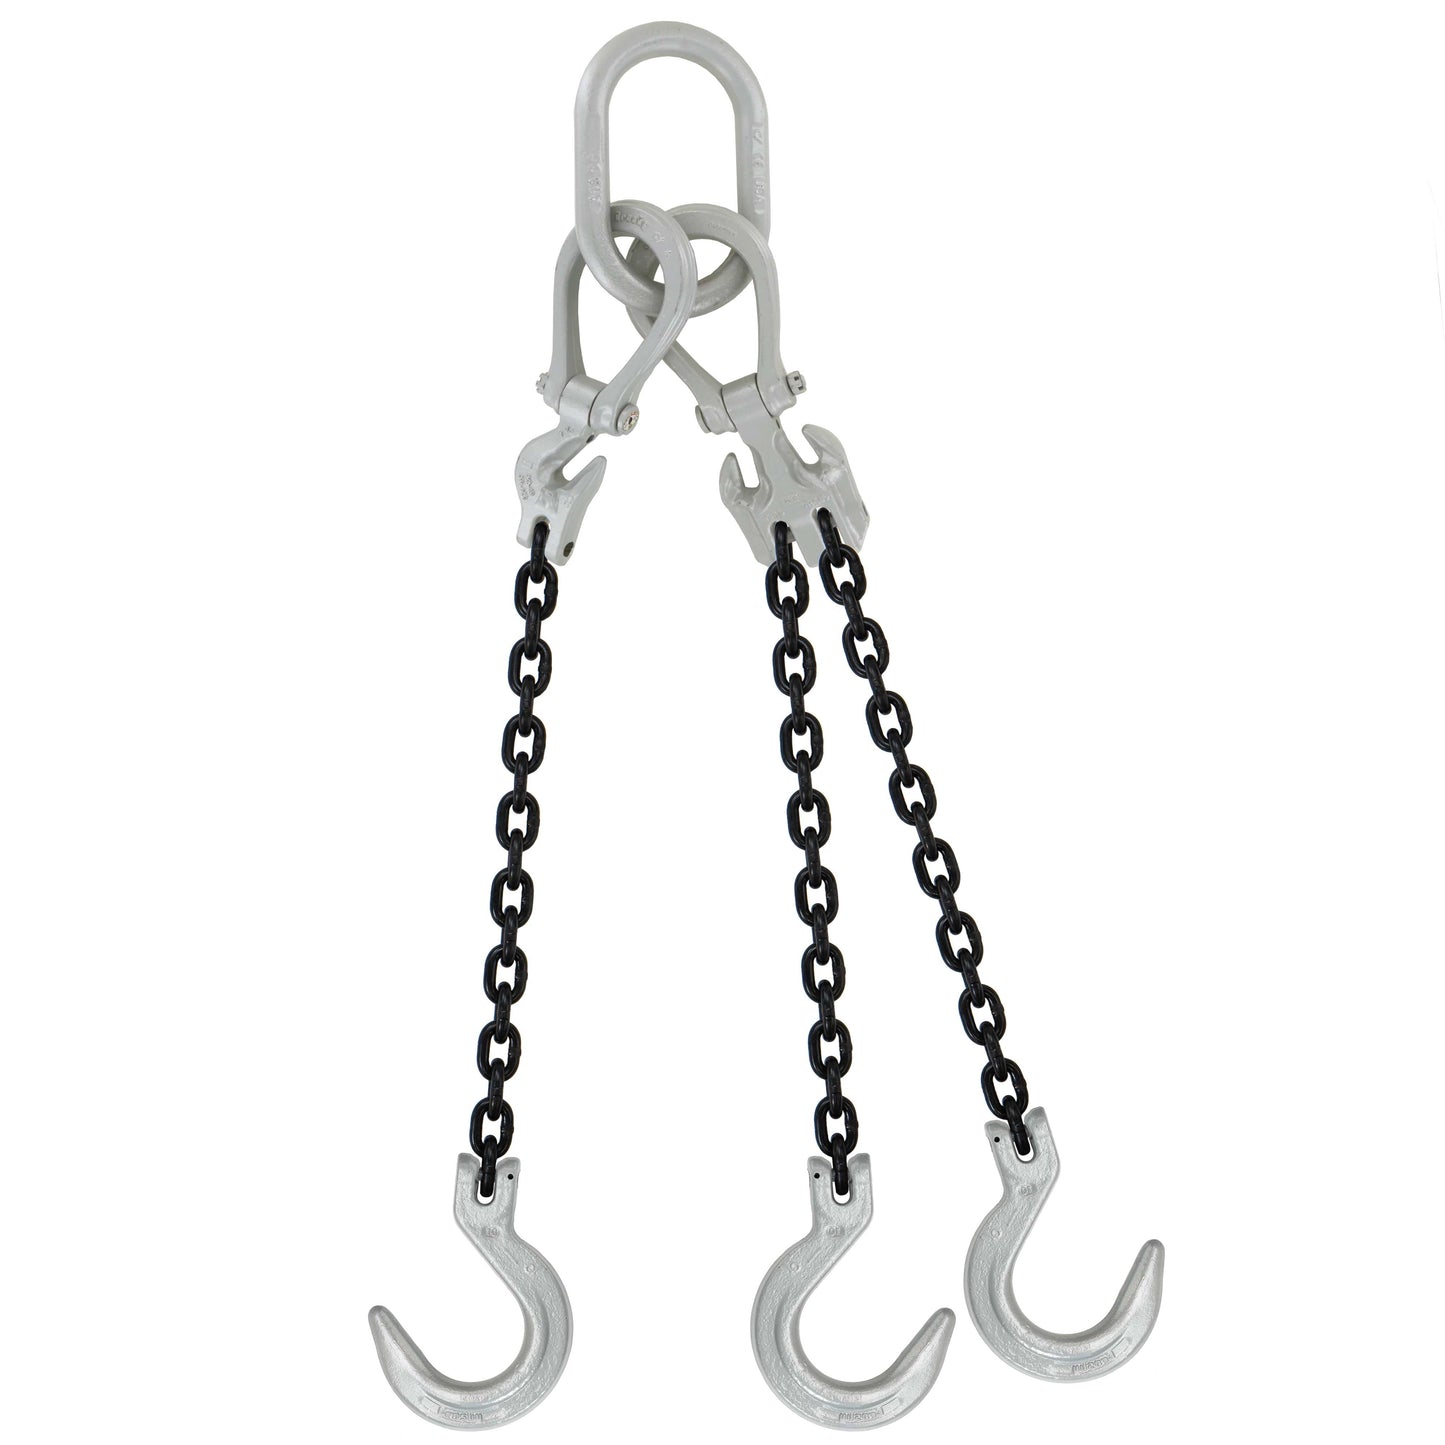 12 inch x 5 foot Domestic Adjustable 3 Leg Chain Sling w Crosby Foundry Hooks Grade 100 image 1 of 2